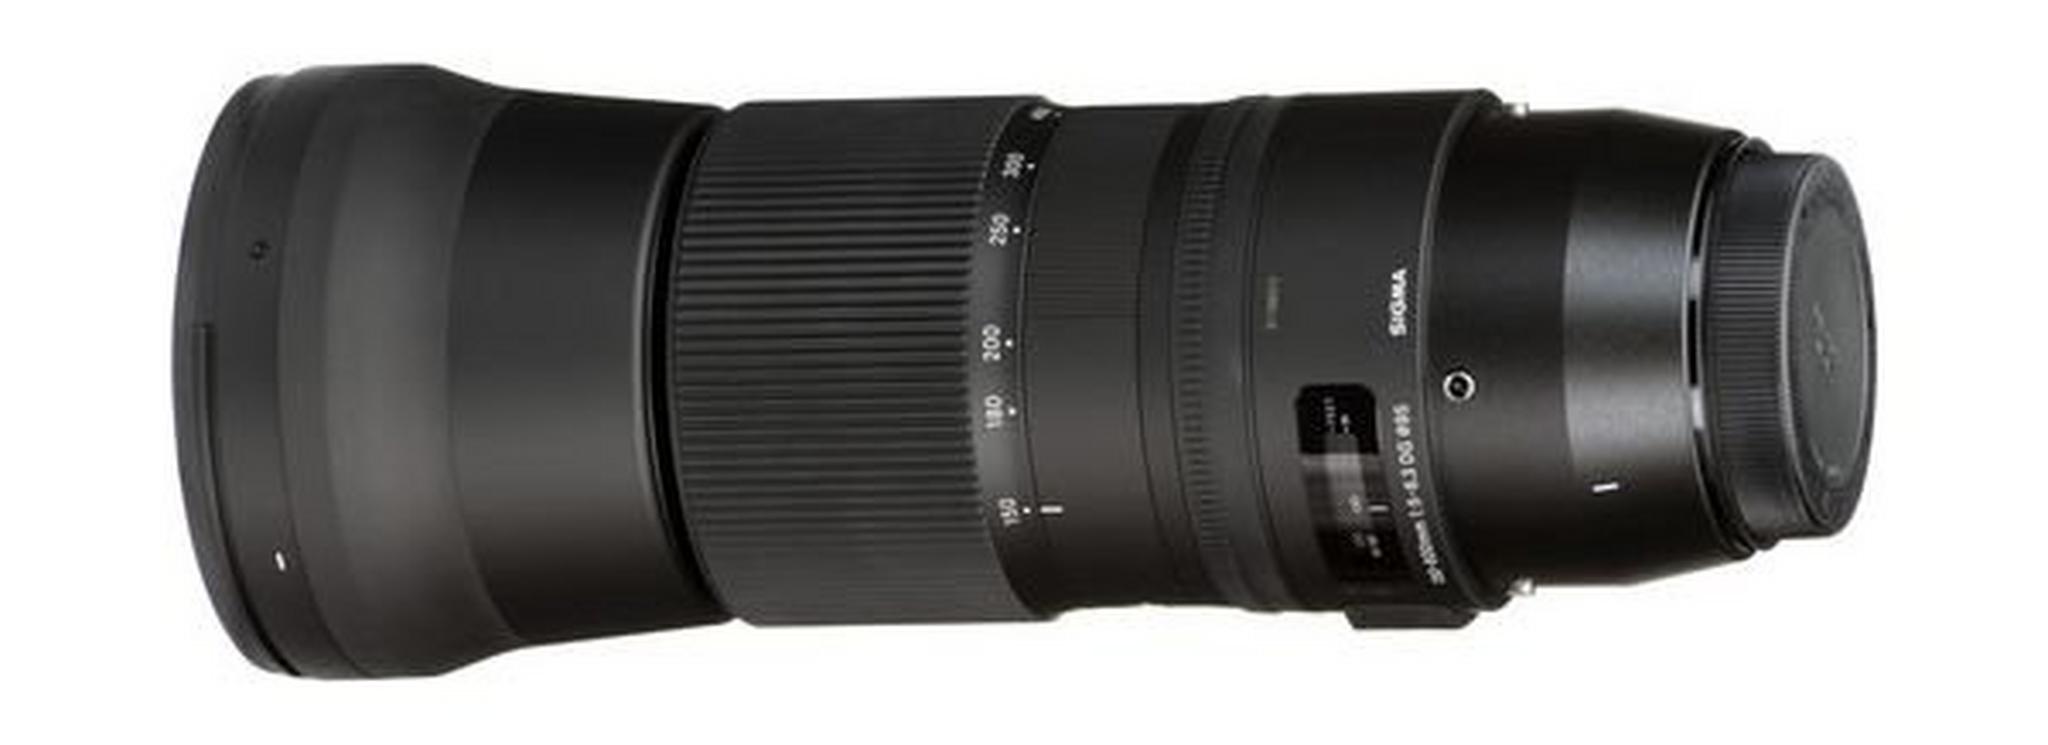 Sigma 150-600mm f/5-6.3 DG OS HSM Contemporary Lens for Canon EF